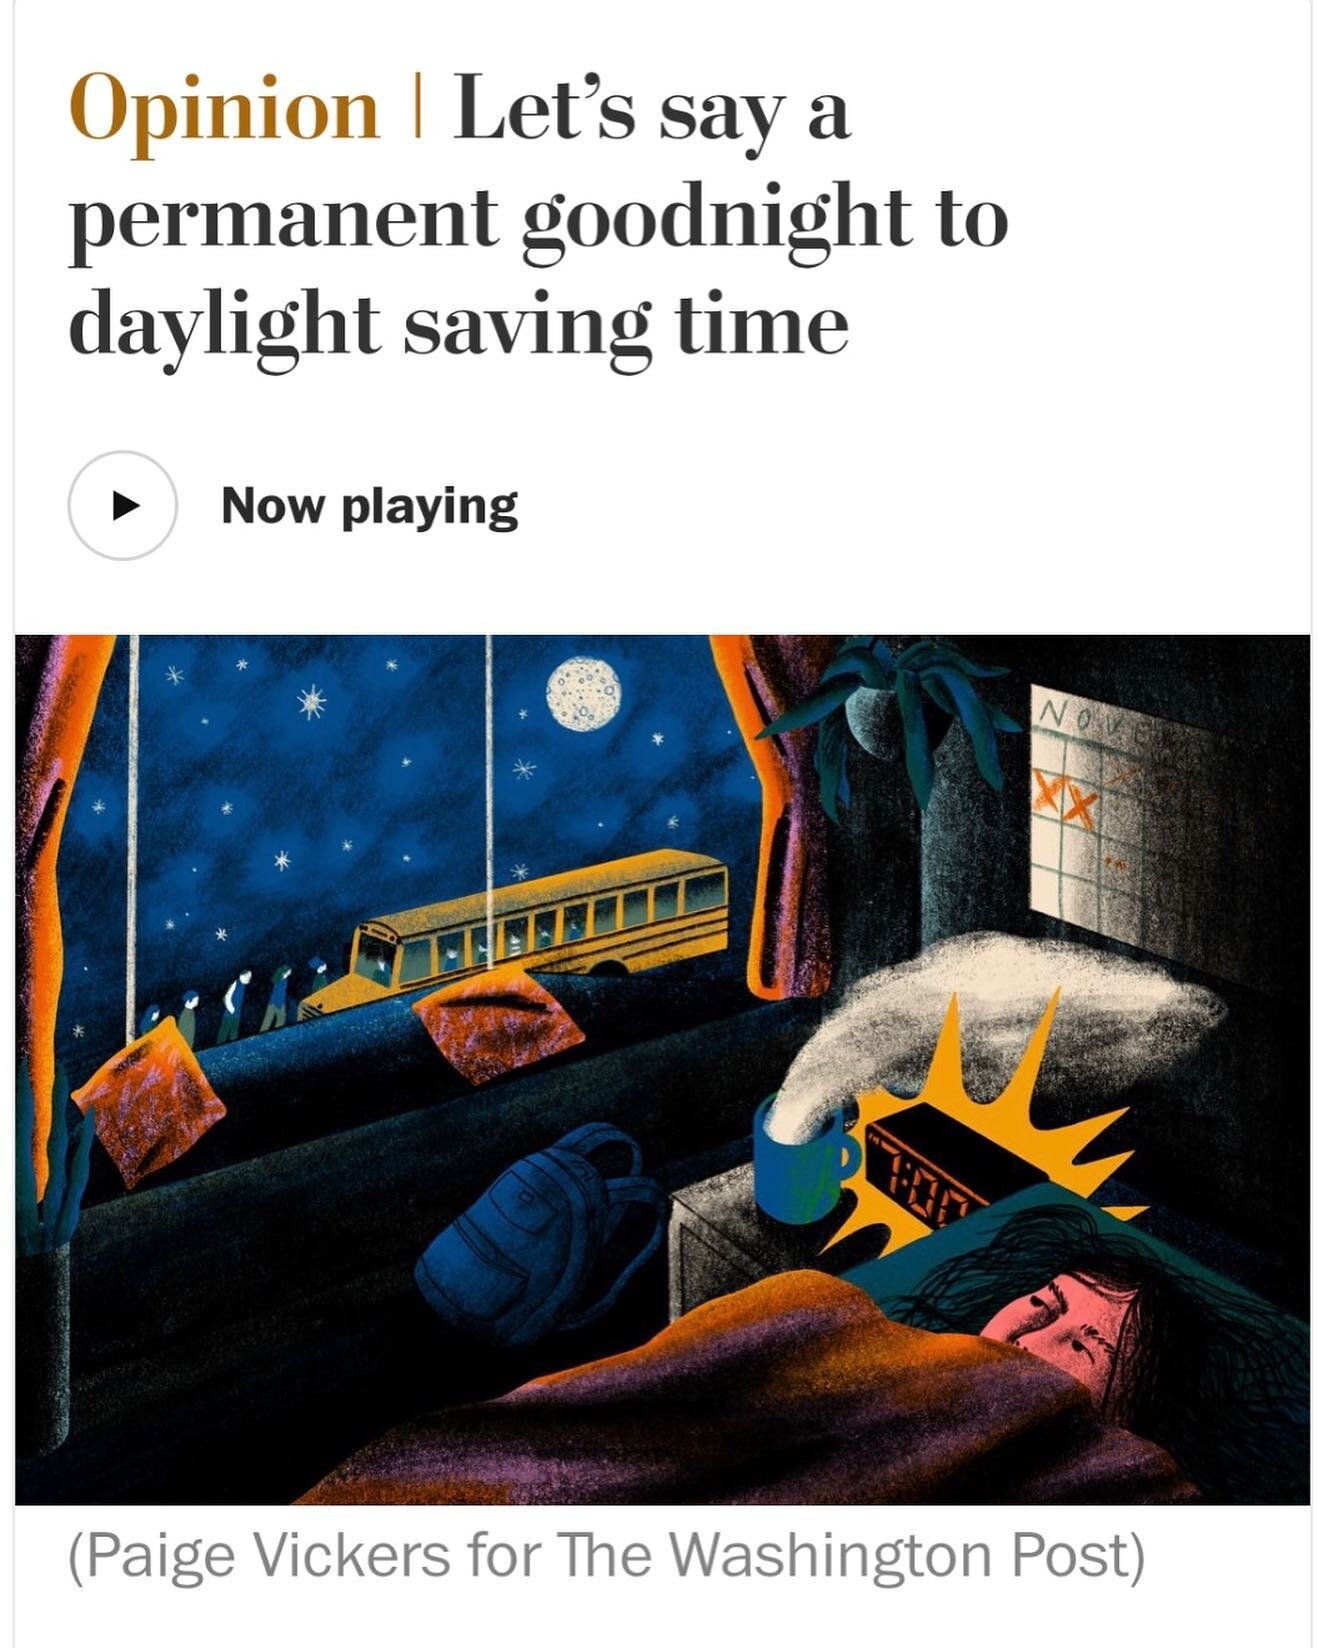 The trend is shifting towards getting rid of daylight saving time all together &mdash; read more in our new OpEd in today&rsquo;s Washington Post to find out why!

Remember we can&rsquo;t change the length of daylight &mdash; even though politicians 